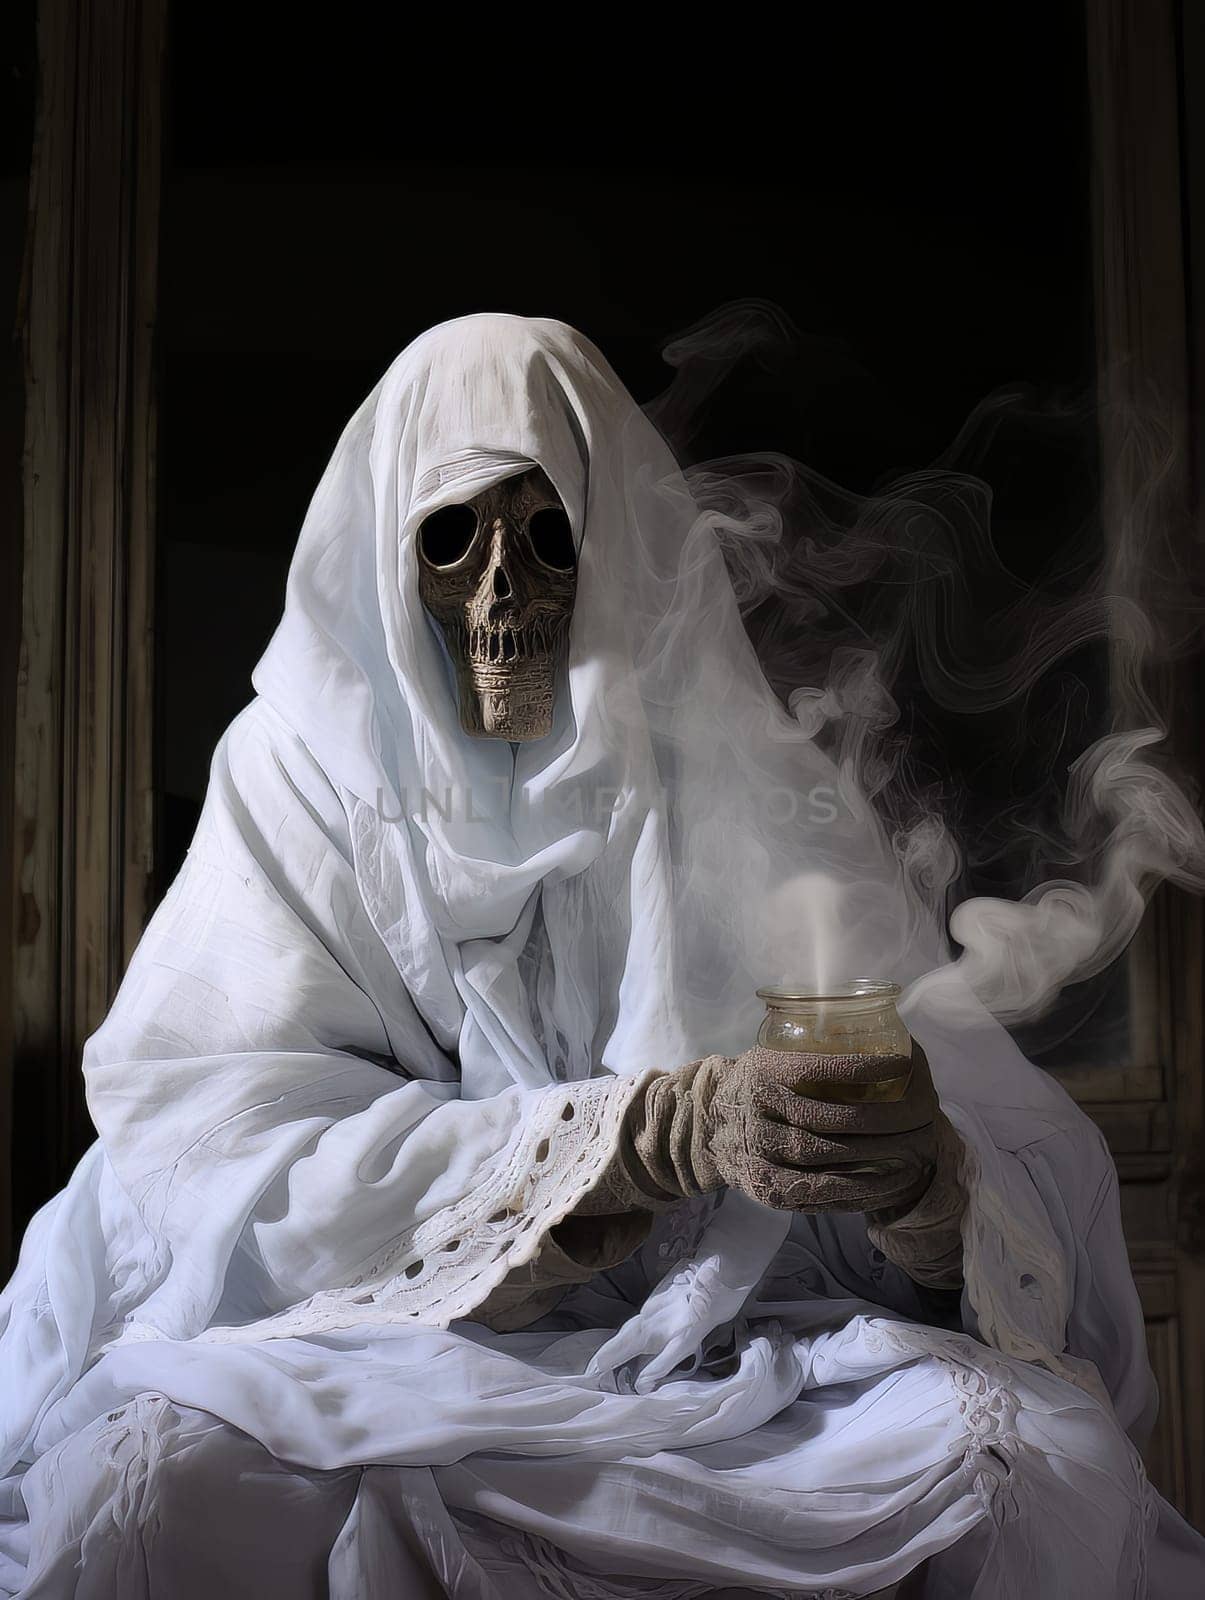 Creepy white ghost sitting in the smoke with smoking incense, AI by but_photo